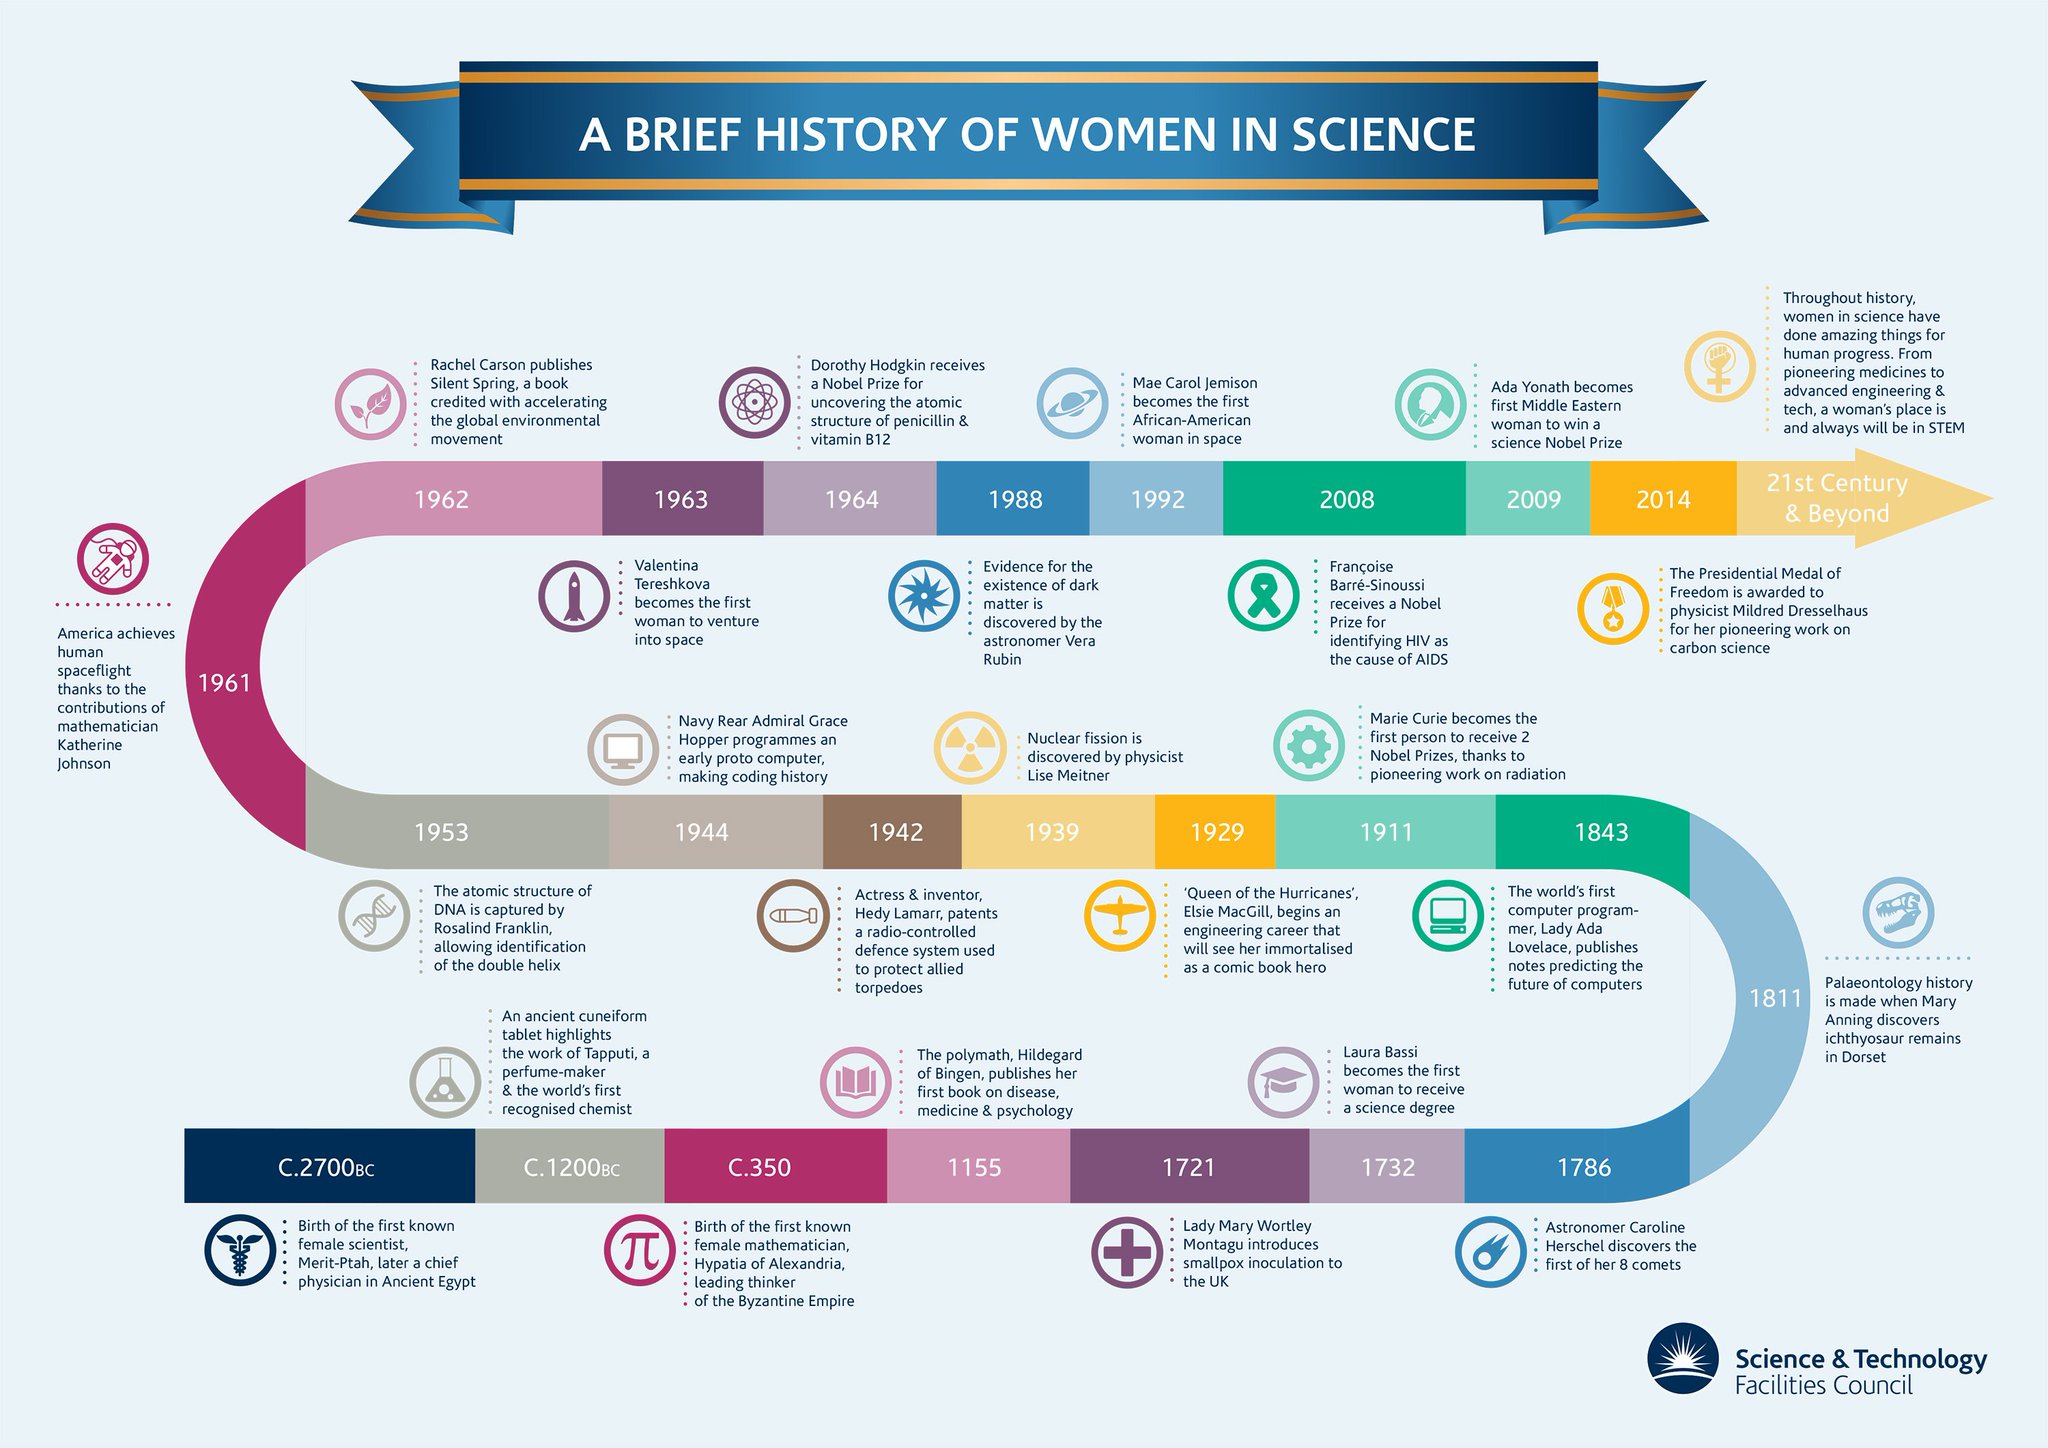 Take a look at some other world changing scientists #AdaLovelaceDay https://t.co/GCIkX4qS0w